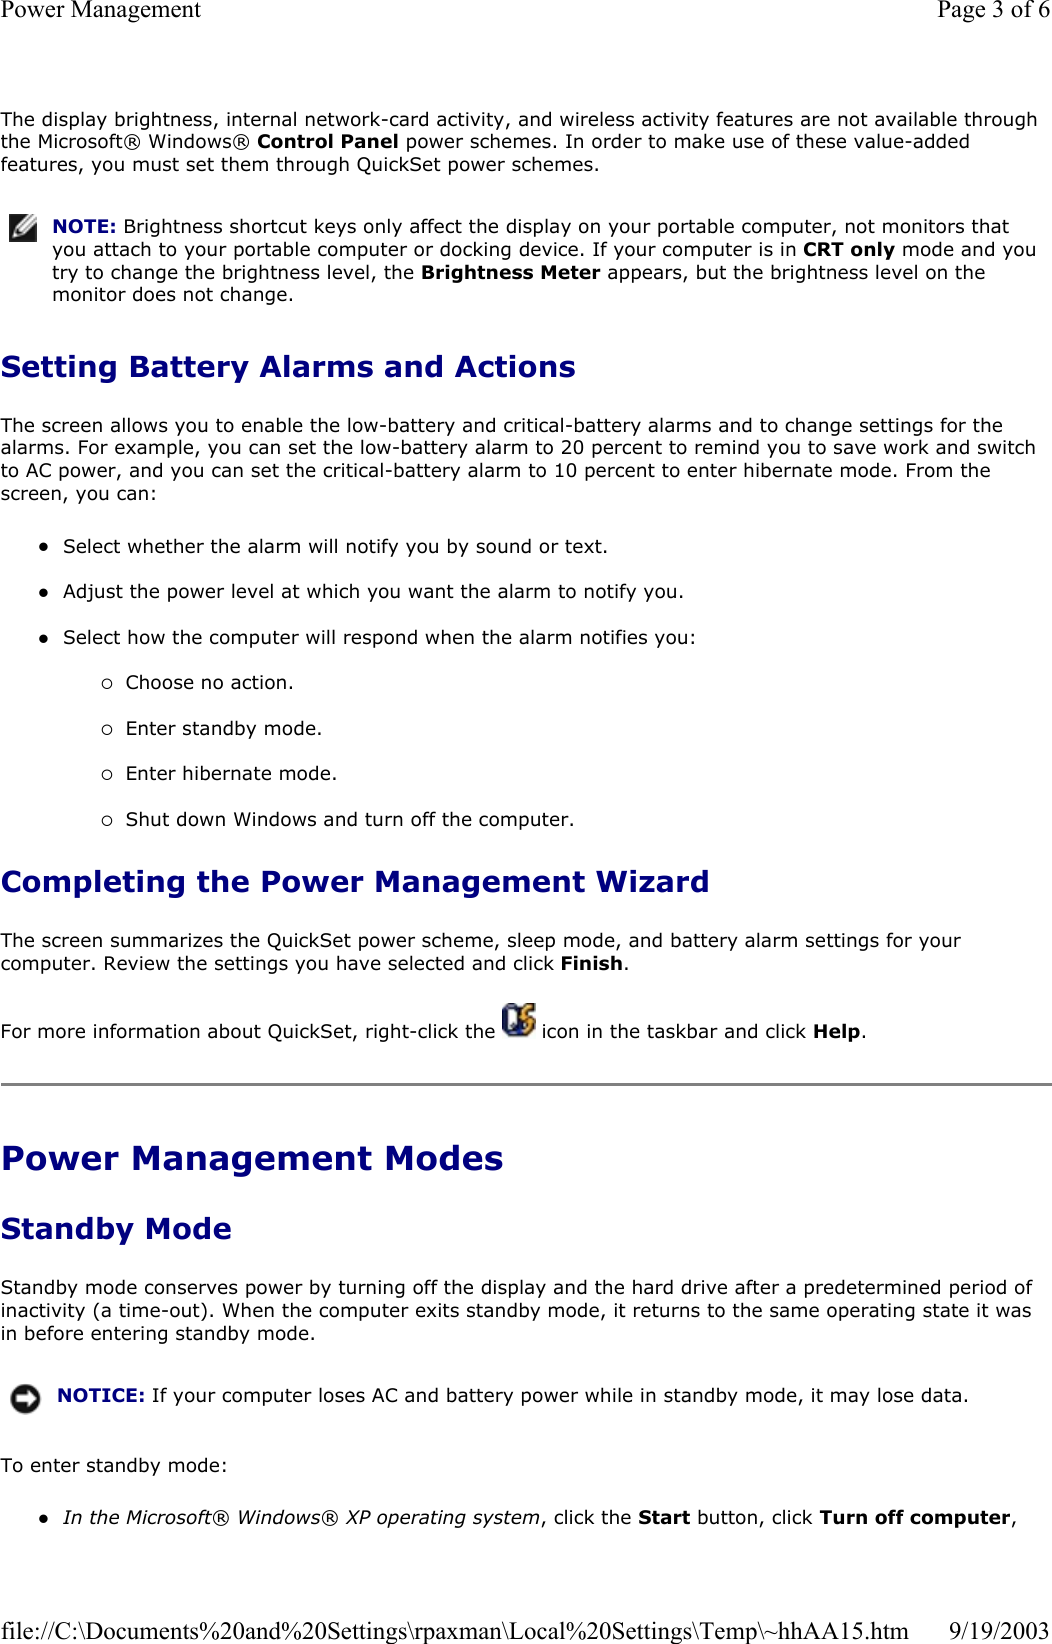 The display brightness, internal network-card activity, and wireless activity features are not available through the Microsoft® Windows® Control Panel power schemes. In order to make use of these value-added features, you must set them through QuickSet power schemes. Setting Battery Alarms and Actions The screen allows you to enable the low-battery and critical-battery alarms and to change settings for the alarms. For example, you can set the low-battery alarm to 20 percent to remind you to save work and switch to AC power, and you can set the critical-battery alarm to 10 percent to enter hibernate mode. From the screen, you can: zSelect whether the alarm will notify you by sound or text.  zAdjust the power level at which you want the alarm to notify you.  zSelect how the computer will respond when the alarm notifies you:  {Choose no action.  {Enter standby mode.  {Enter hibernate mode.  {Shut down Windows and turn off the computer.  Completing the Power Management Wizard The screen summarizes the QuickSet power scheme, sleep mode, and battery alarm settings for your computer. Review the settings you have selected and click Finish. For more information about QuickSet, right-click the   icon in the taskbar and click Help. Power Management Modes Standby Mode Standby mode conserves power by turning off the display and the hard drive after a predetermined period of inactivity (a time-out). When the computer exits standby mode, it returns to the same operating state it was in before entering standby mode. To enter standby mode: zIn the Microsoft® Windows® XP operating system, click the Start button, click Turn off computer, NOTE: Brightness shortcut keys only affect the display on your portable computer, not monitors that you attach to your portable computer or docking device. If your computer is in CRT only mode and you try to change the brightness level, the Brightness Meter appears, but the brightness level on the monitor does not change.NOTICE: If your computer loses AC and battery power while in standby mode, it may lose data.Page 3 of 6Power Management9/19/2003file://C:\Documents%20and%20Settings\rpaxman\Local%20Settings\Temp\~hhAA15.htm